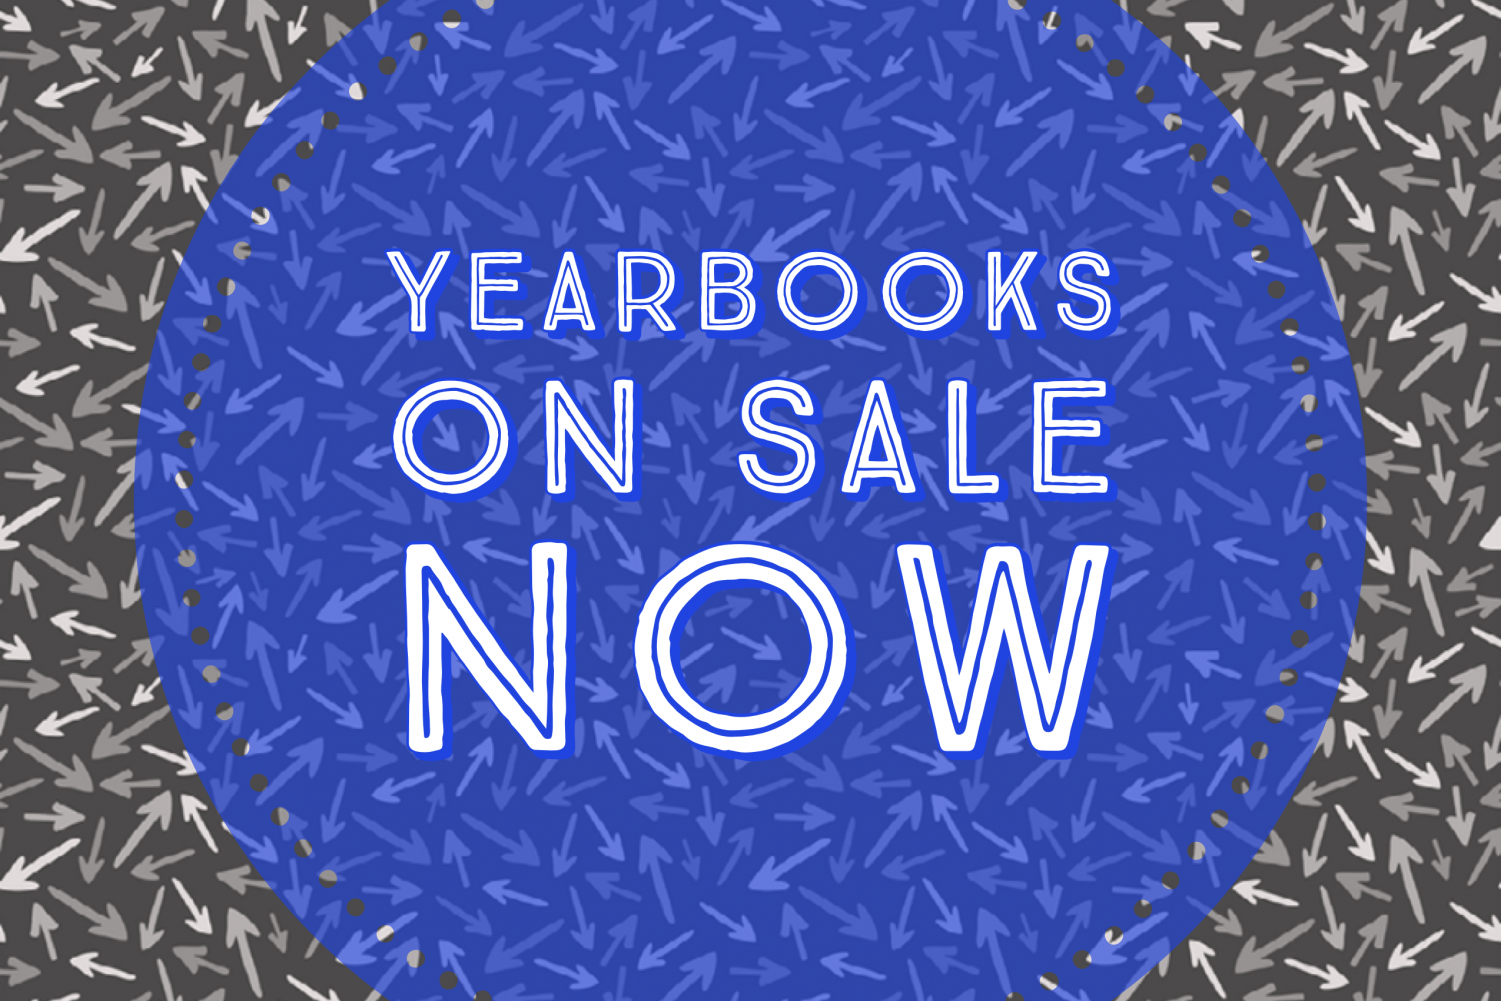 Yearbook are now on sale. They are $60 for the month of November.